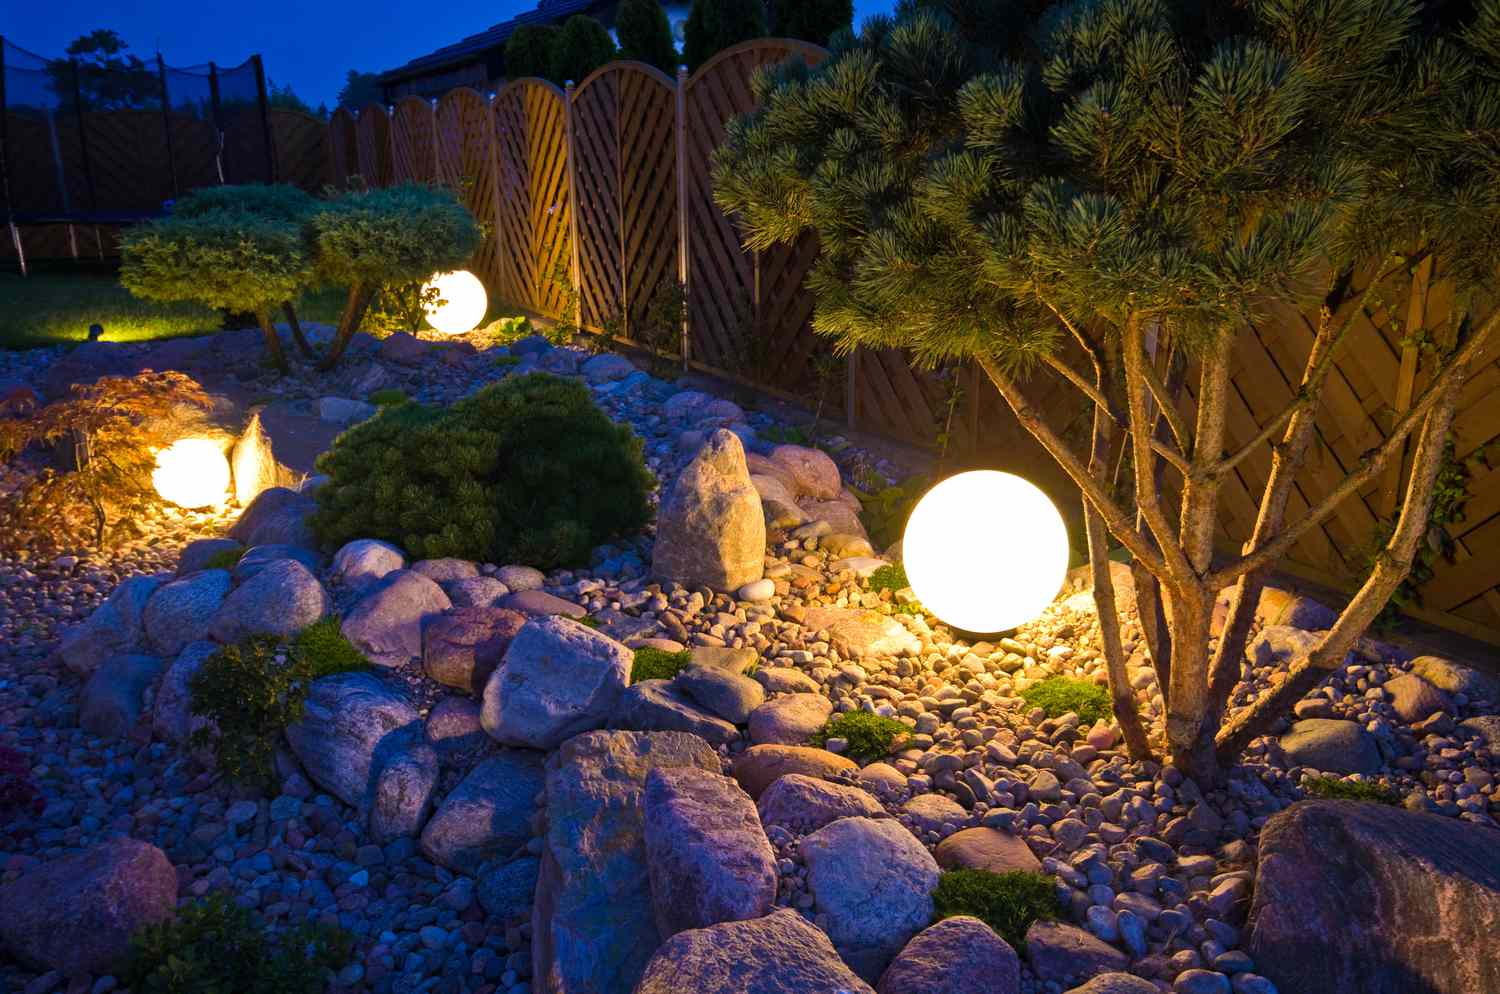  Illuminate Your Nights: A Guide to Stunning Landscape Lighting